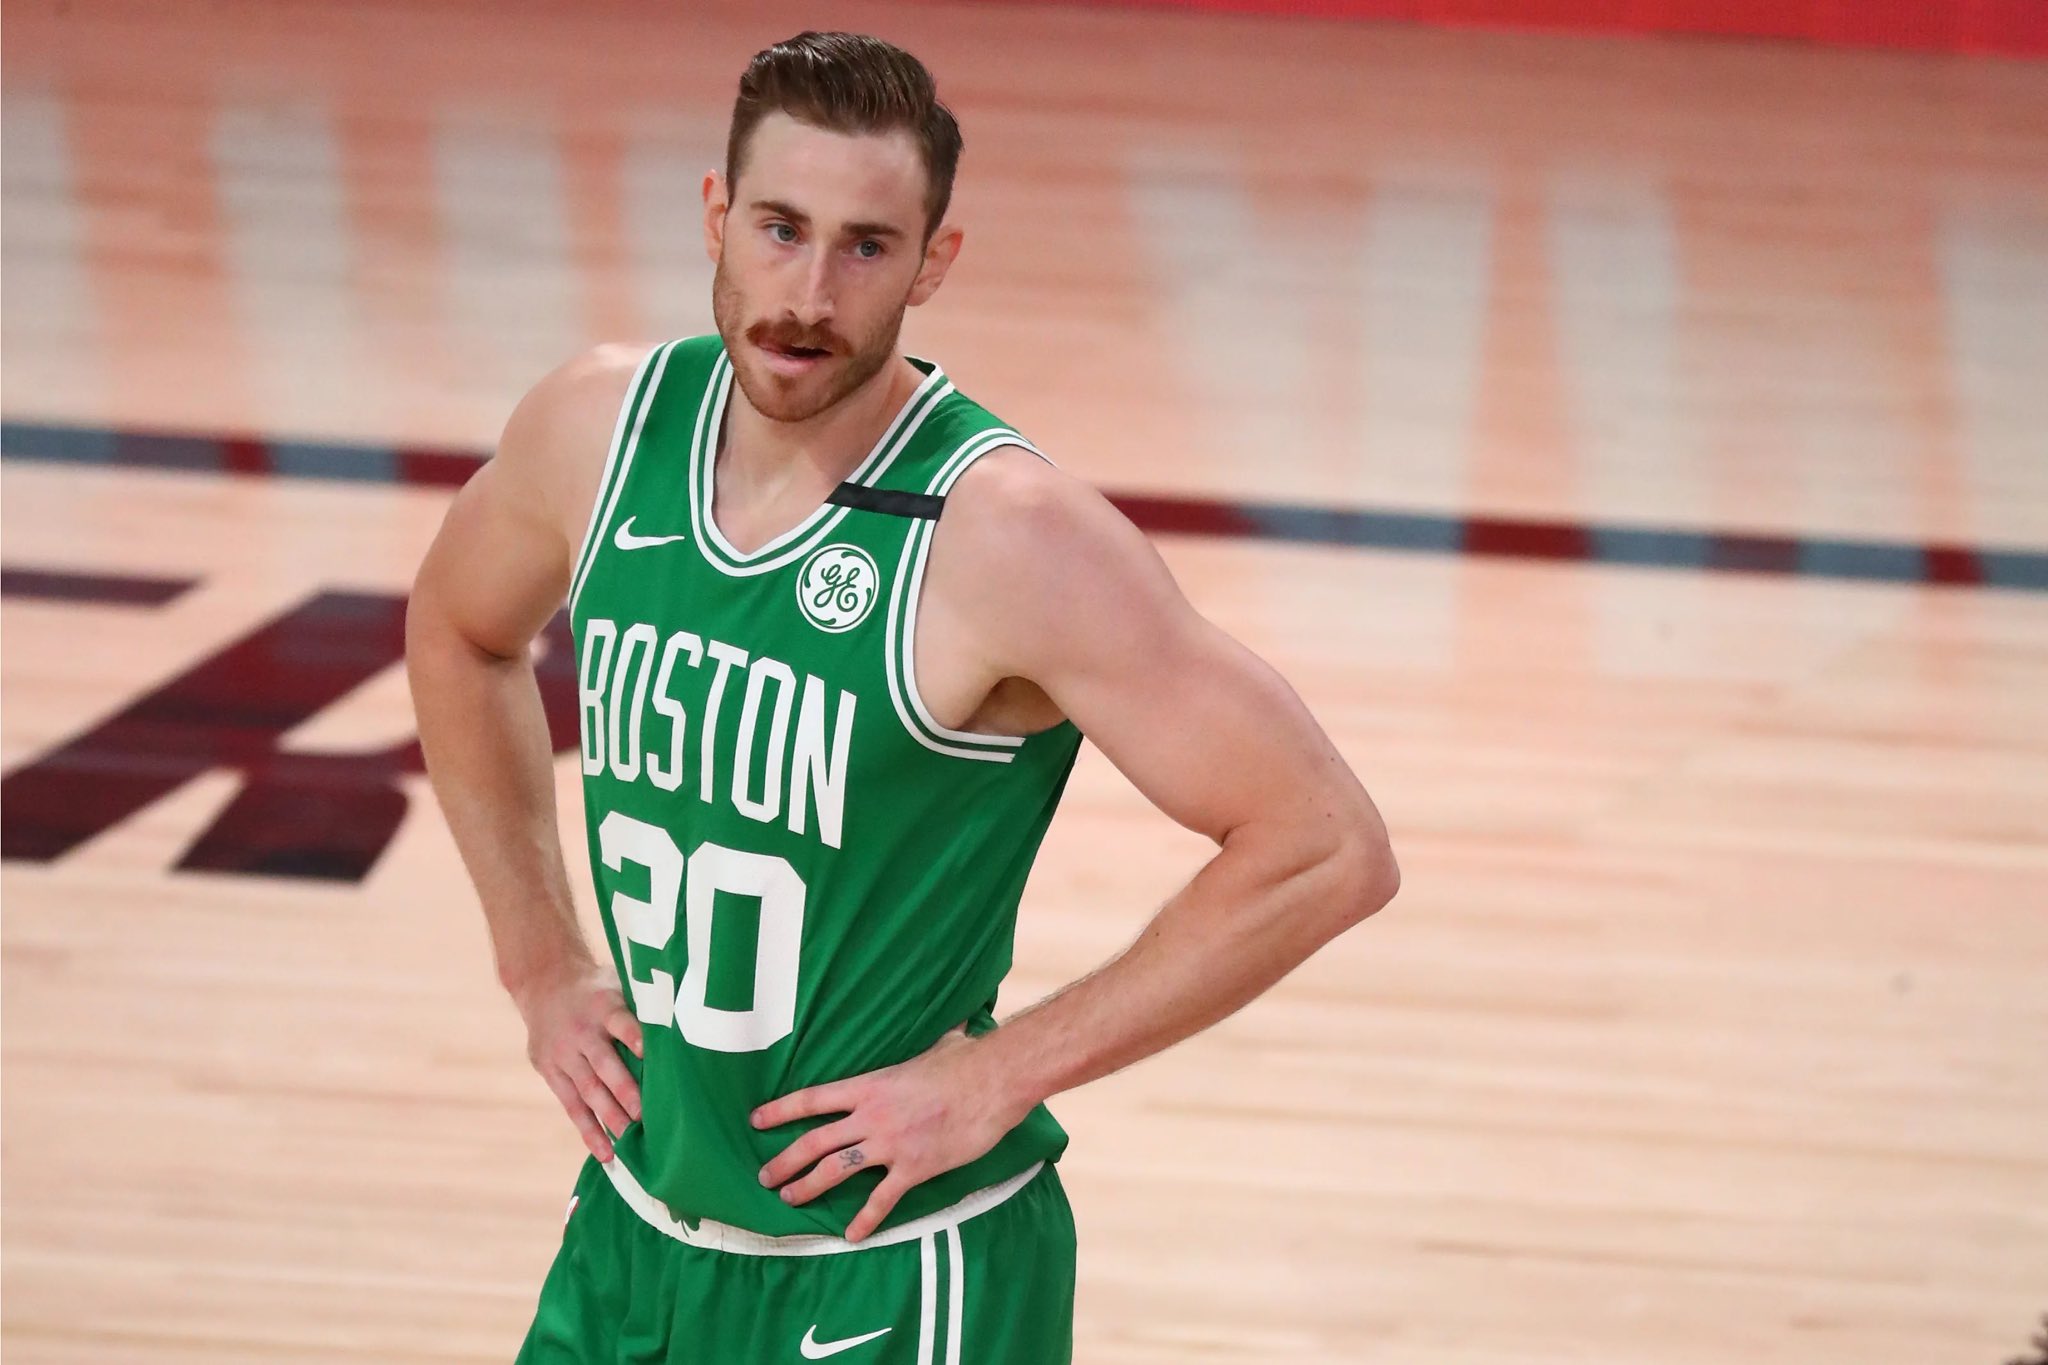 The New York Knicks reportedly have trade interest in Gordon Hayward if Bos...